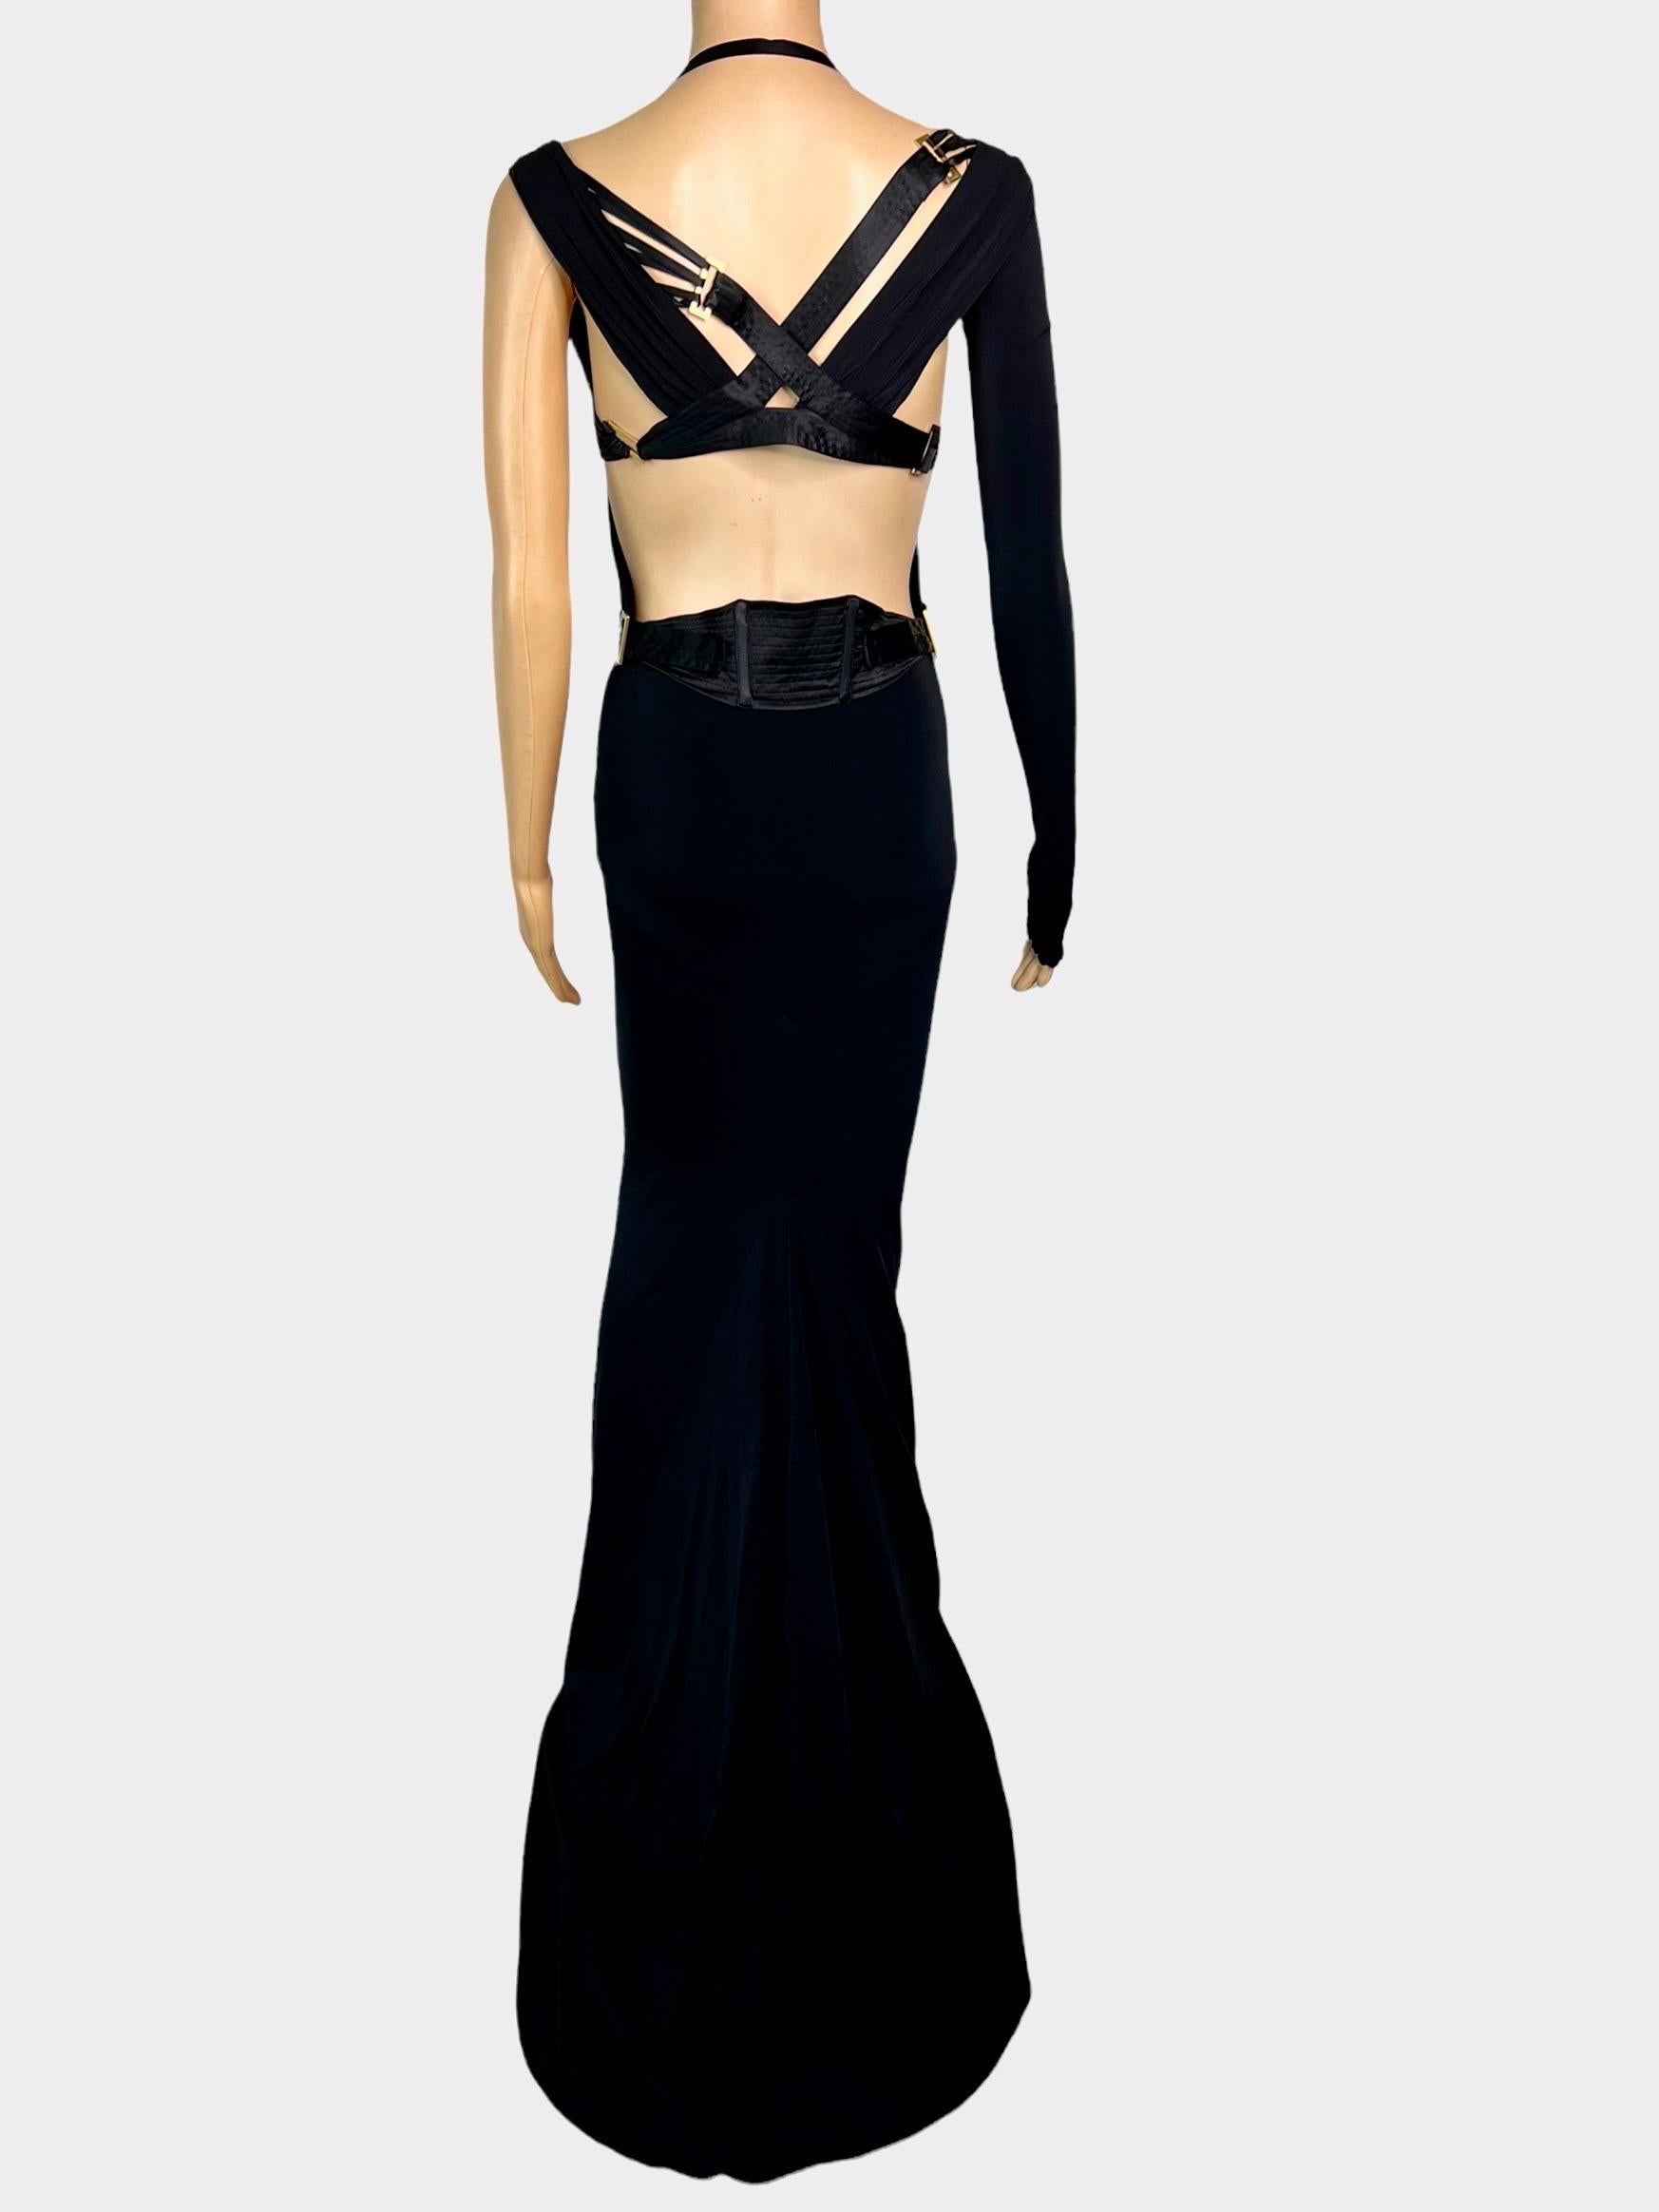 Tom Ford for Gucci F/W 2003 Bustier Corset Cutout Train Black Evening Dress Gown In Good Condition In Naples, FL